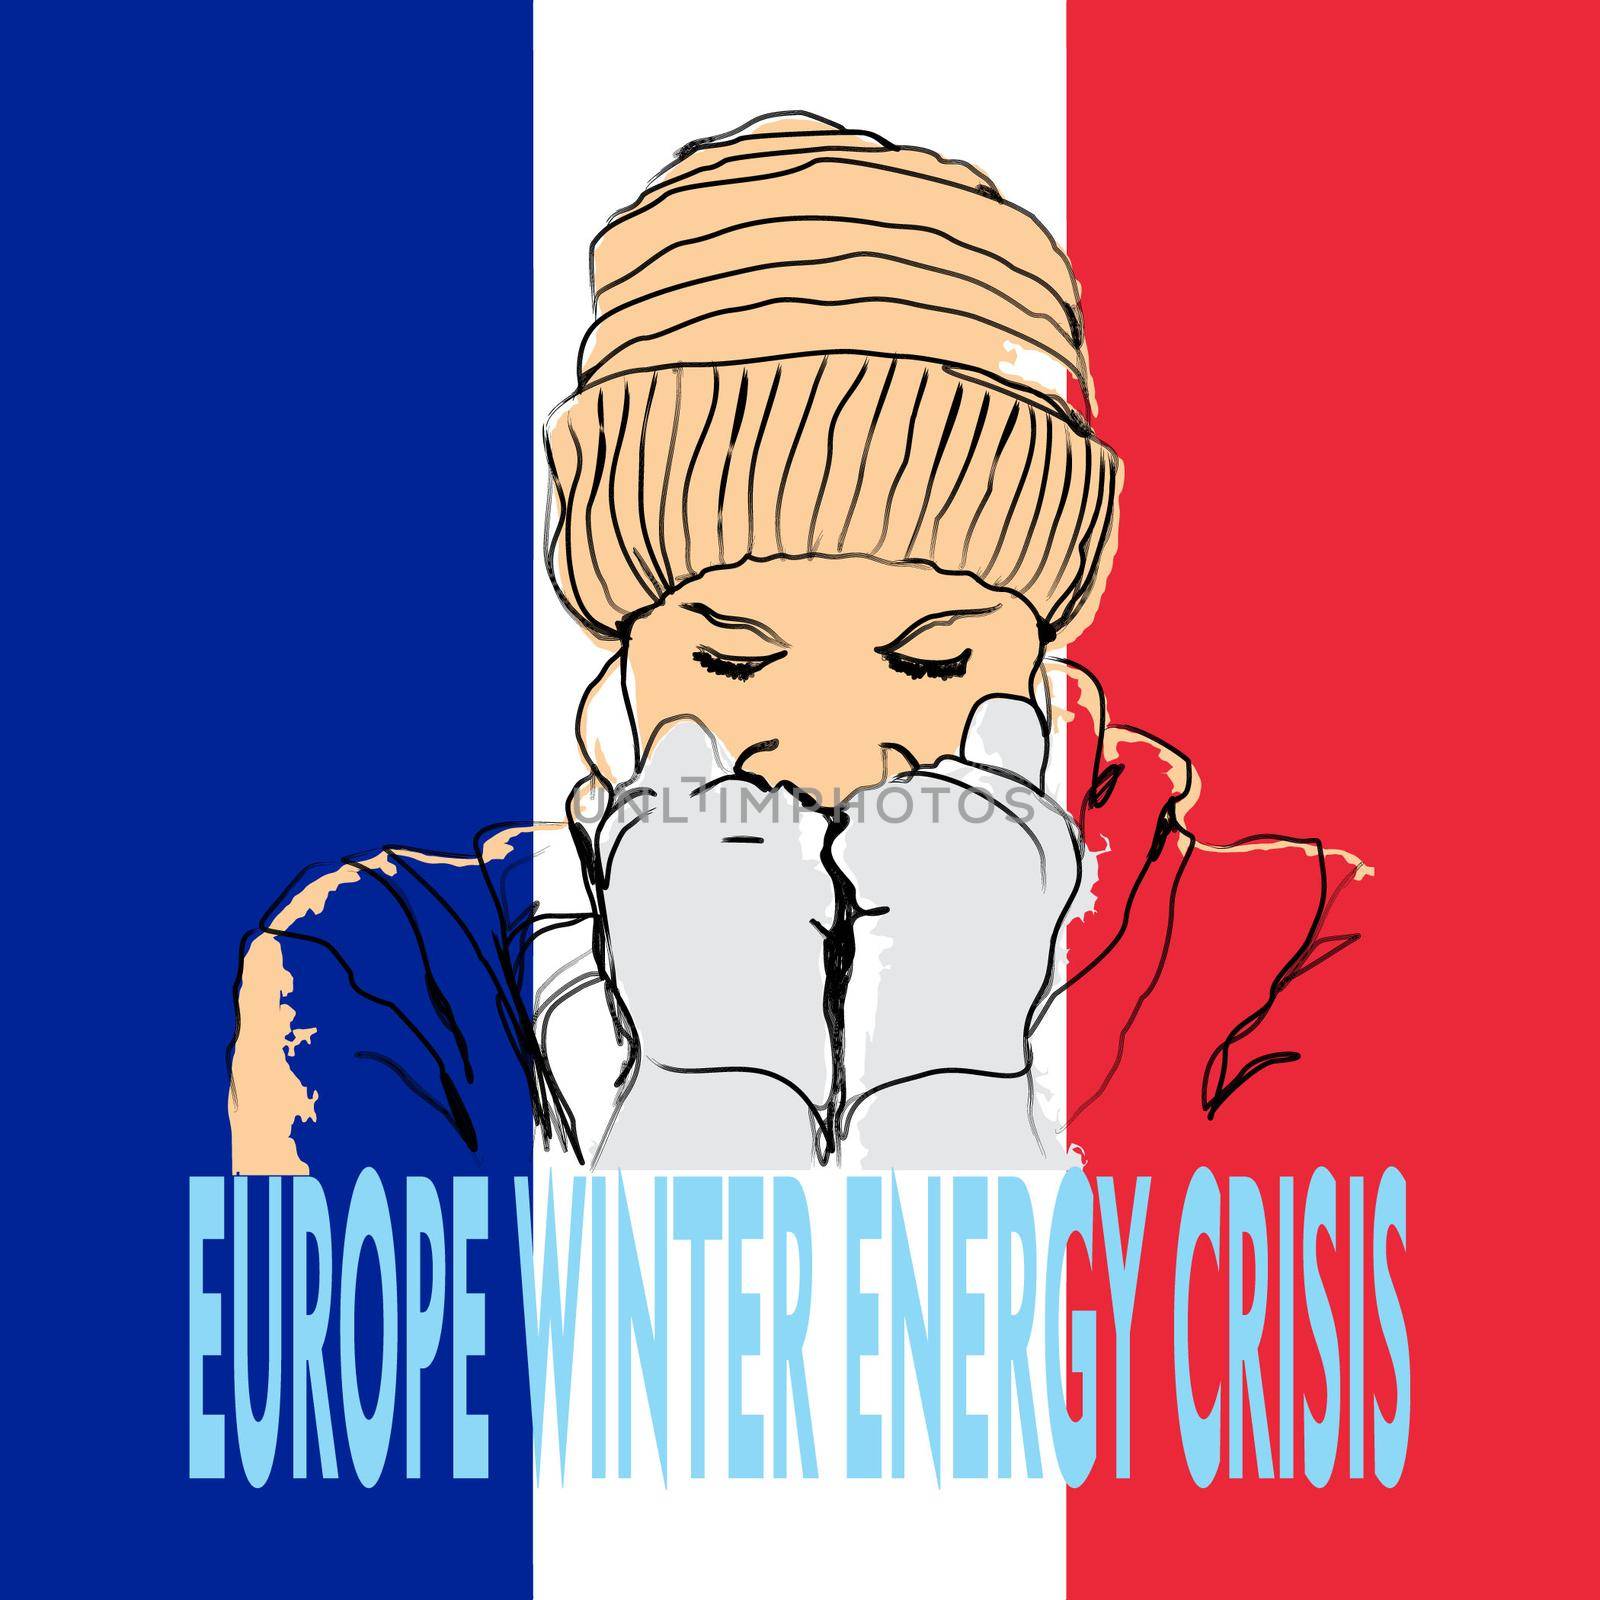 Hand drawn illustration of a cold person on the French flag background. useful for posters, pamphlets, wall decorations to invite people to be aware of energy that is increasingly expensive and scarce